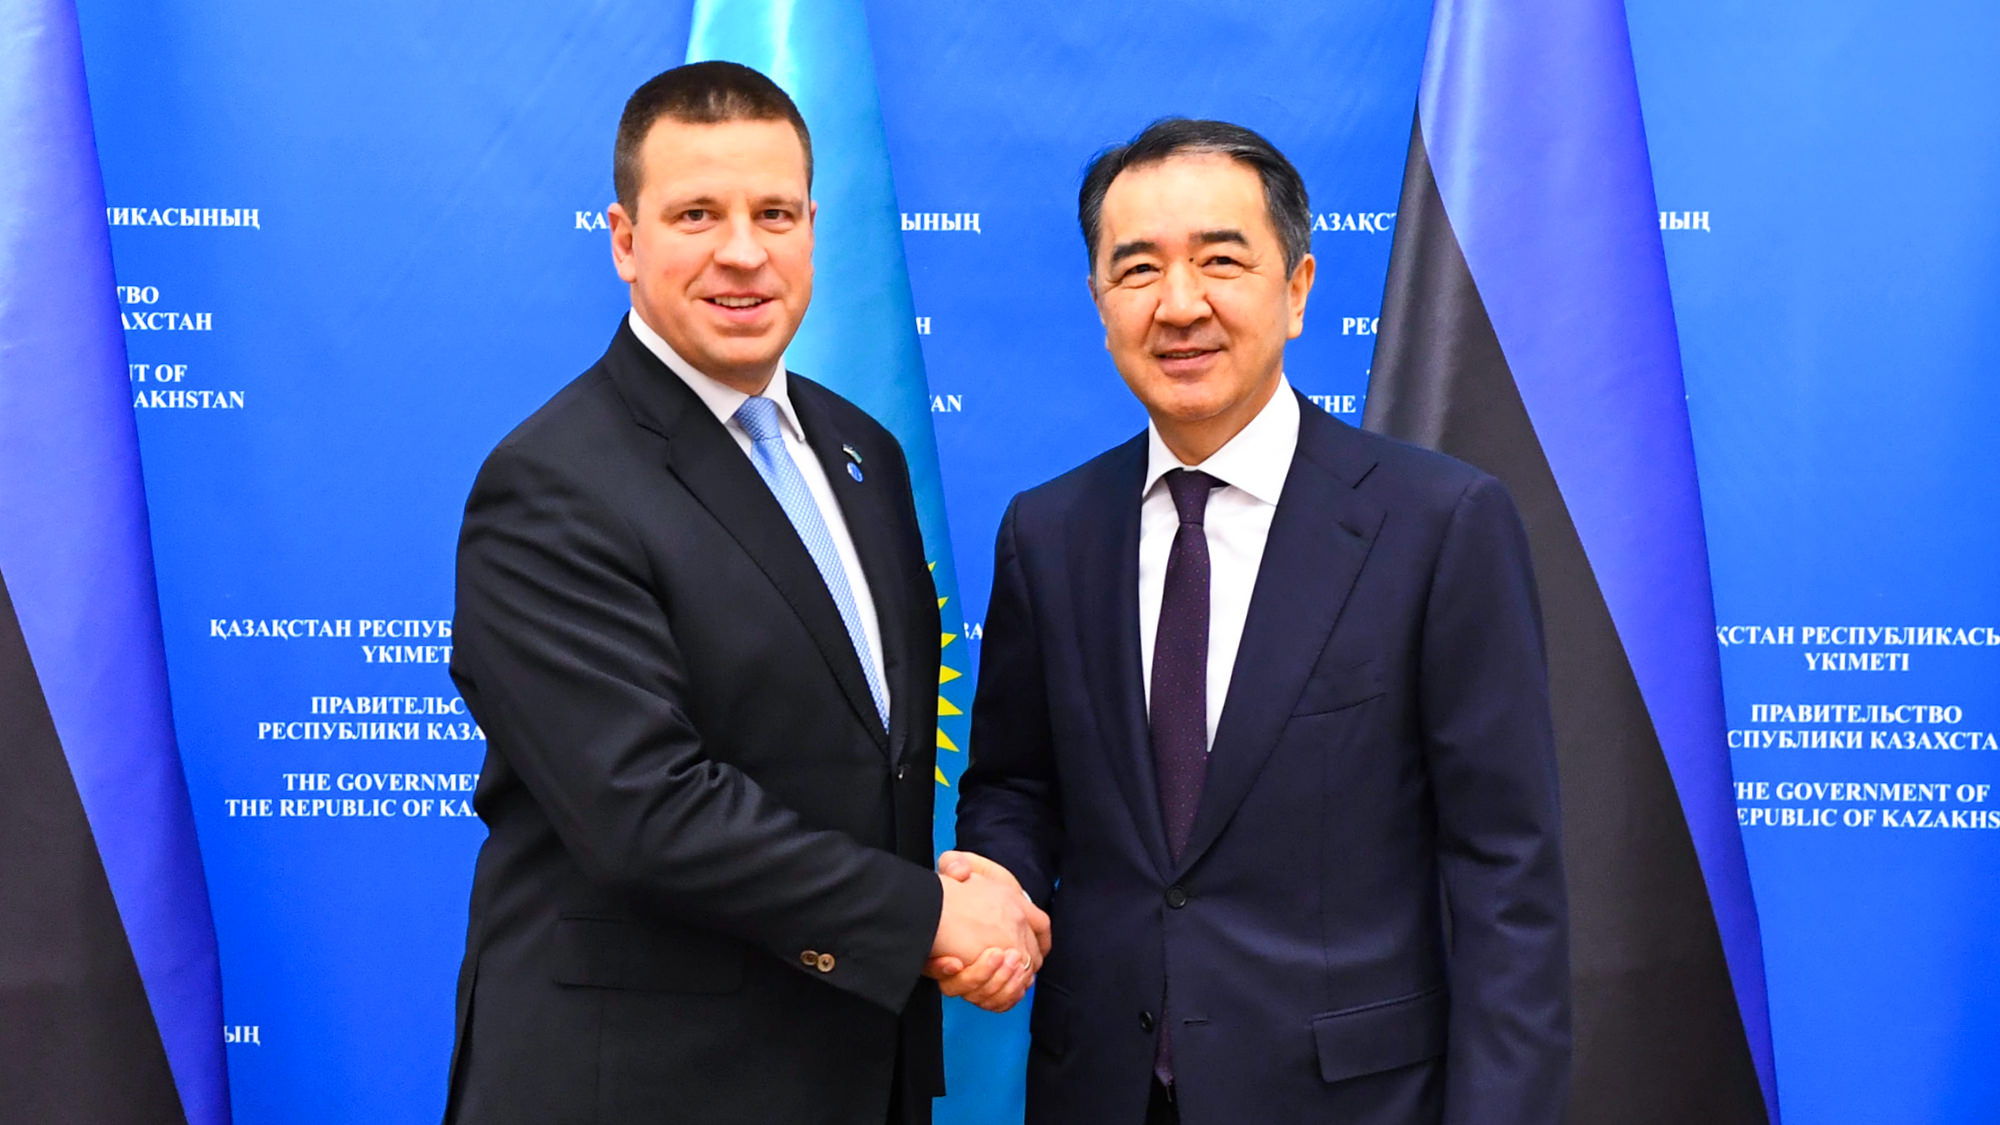 Prime Ministers of Kazakhstan and Estonia discuss prospects for expanding cooperation in the field of digitalization